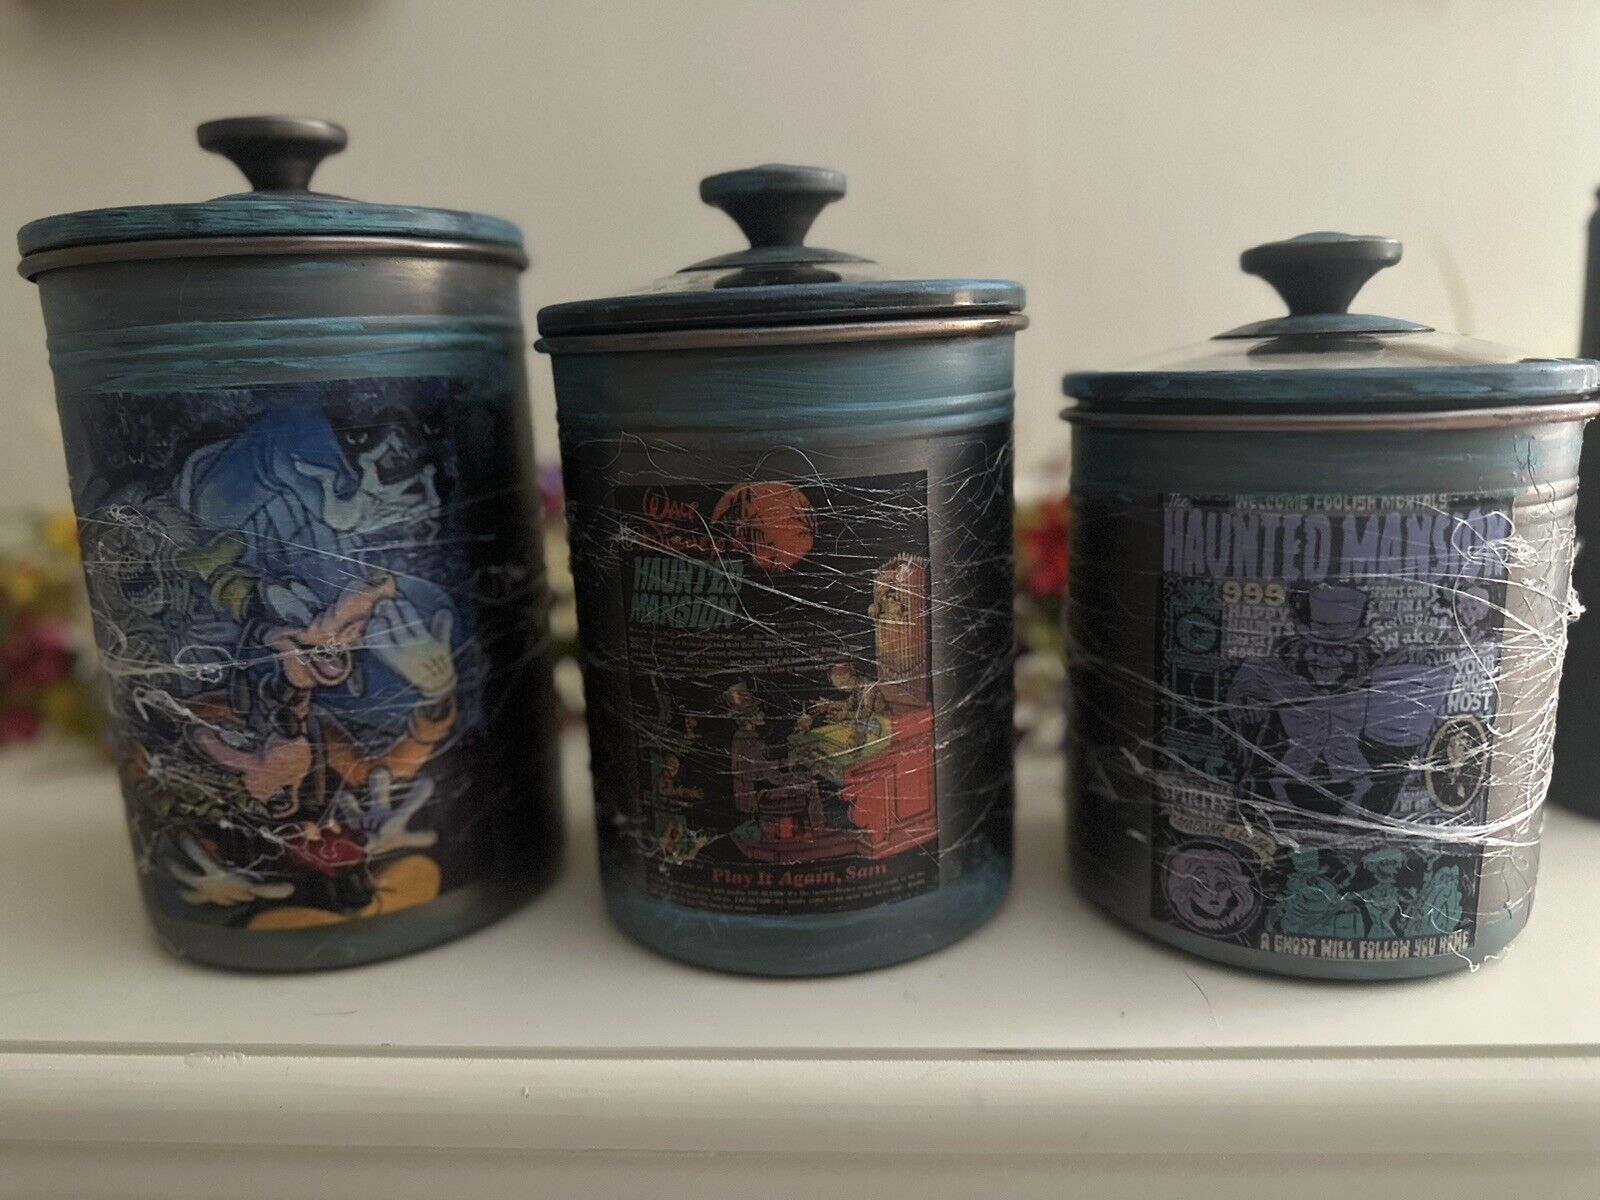 Disney Haunted Mansion canister set of 3